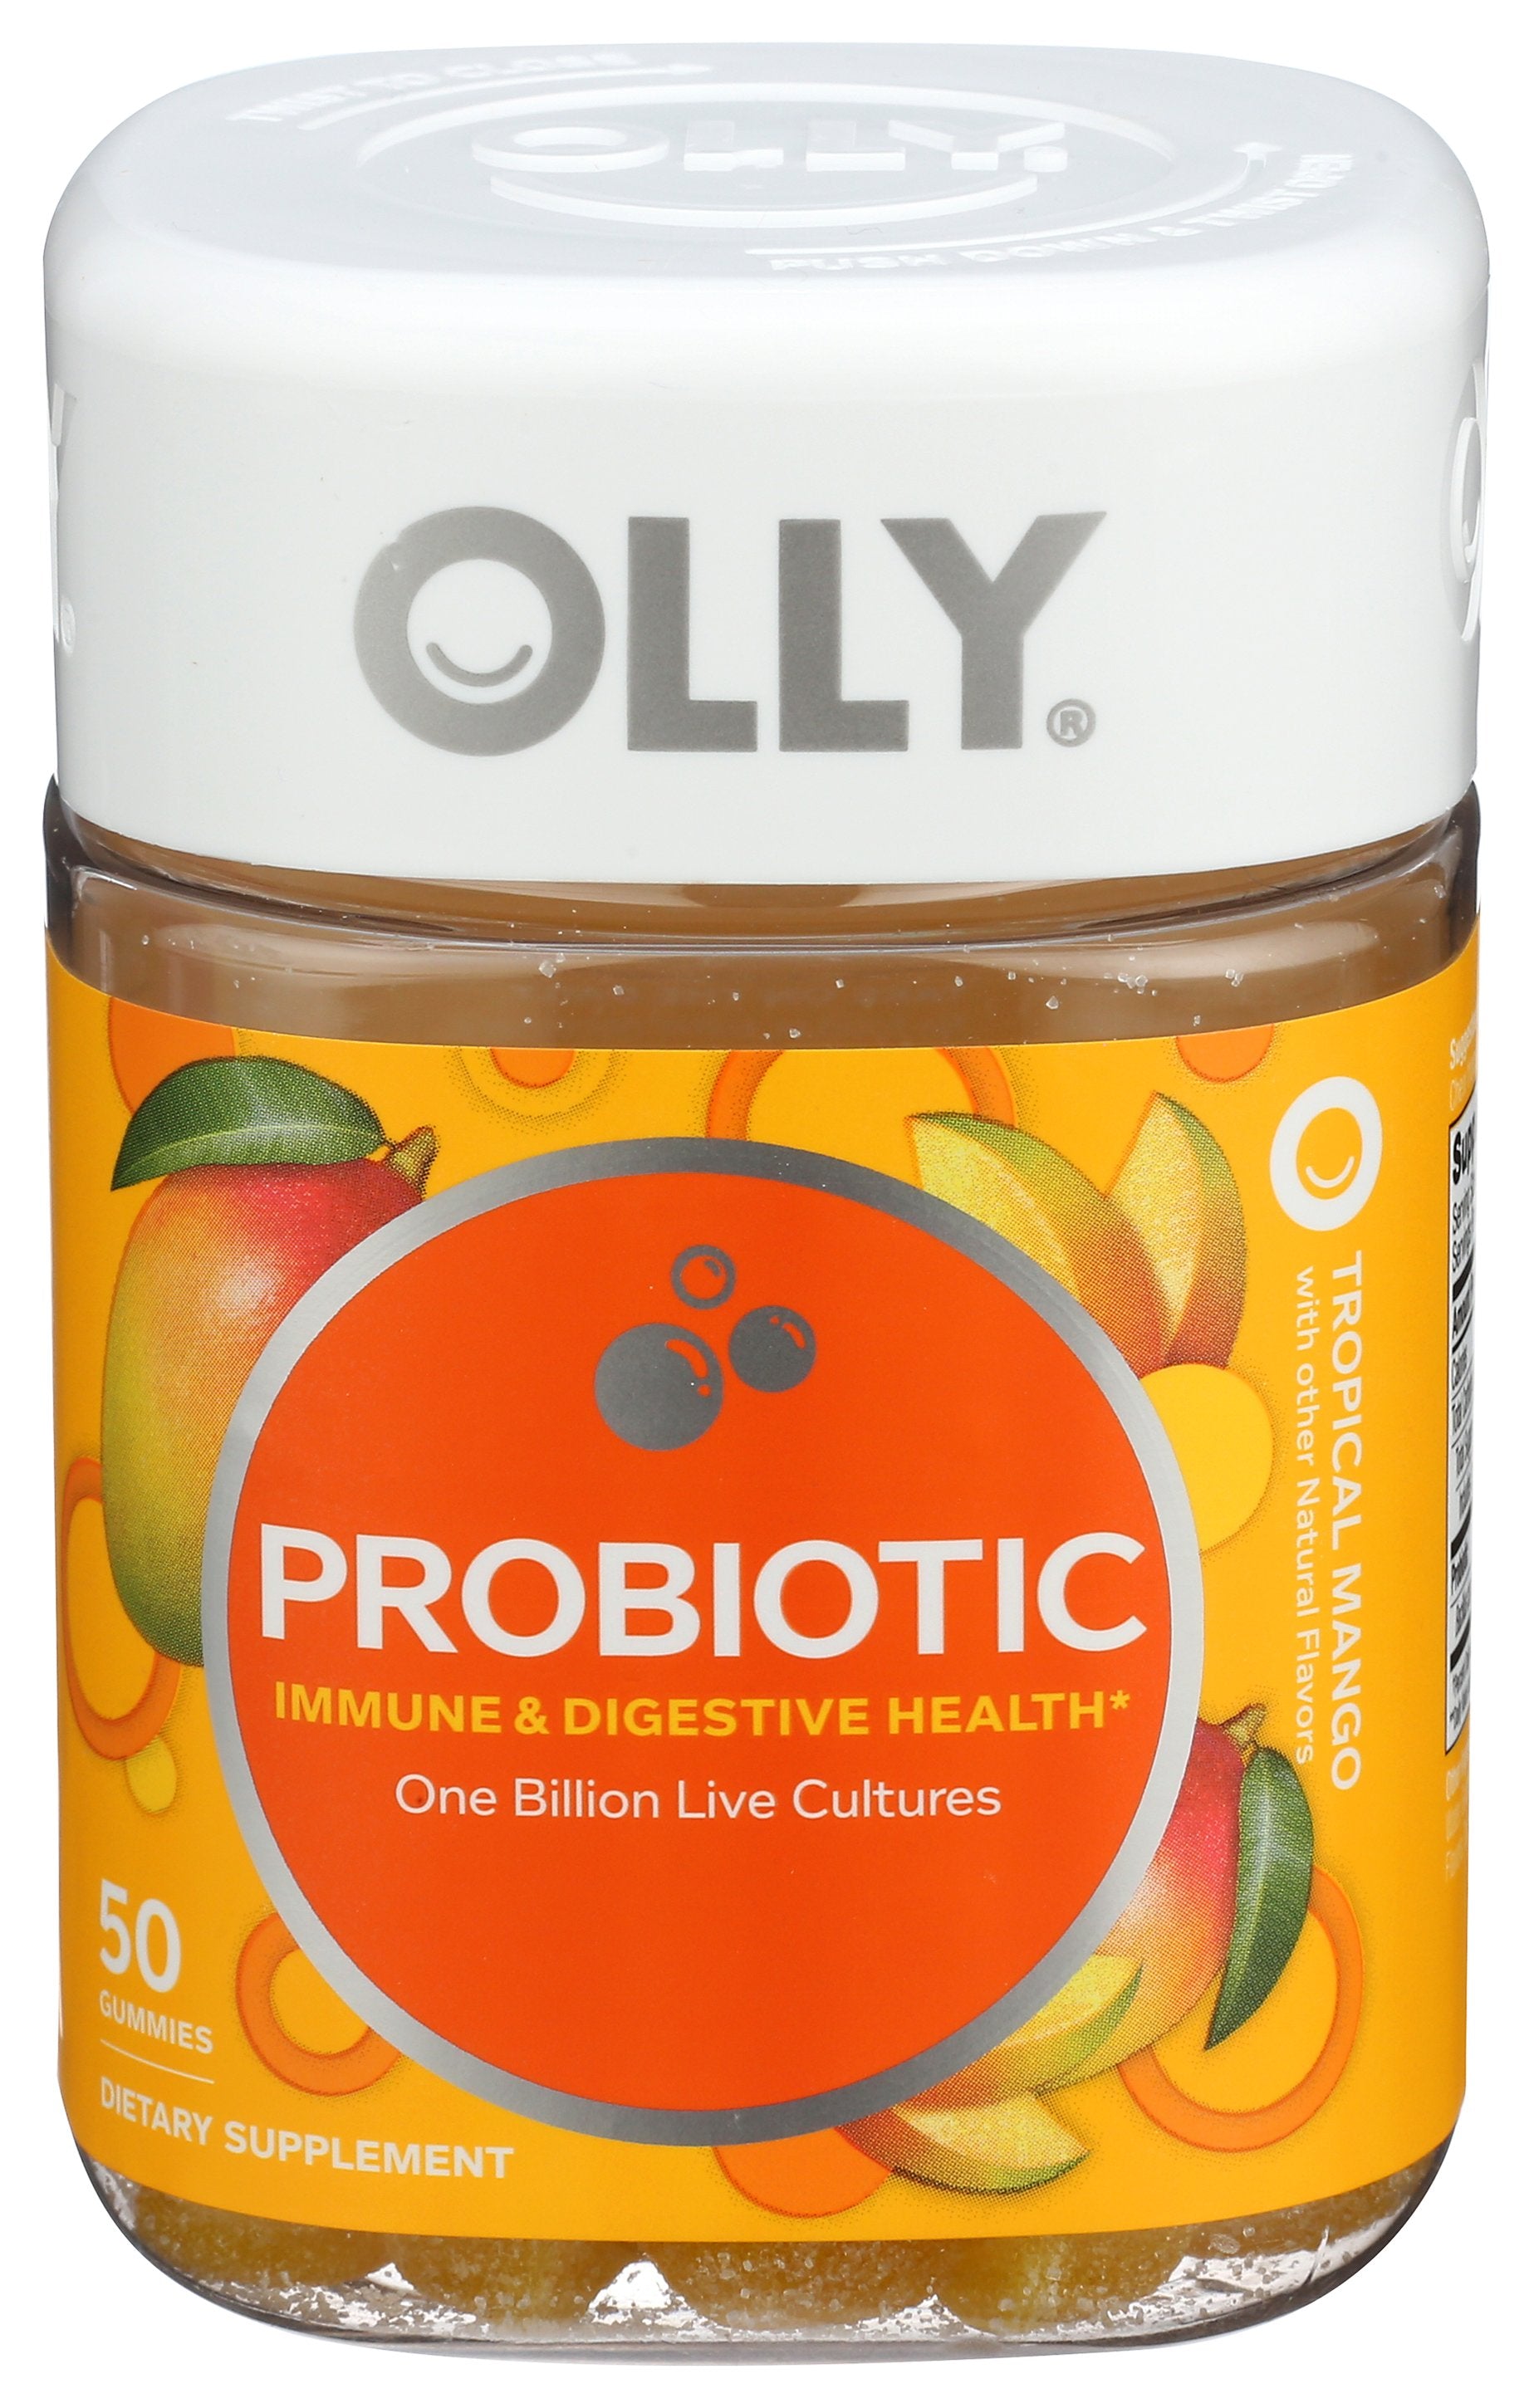 OLLY SUPPLEMENT PROBIOTIC - Case of 3